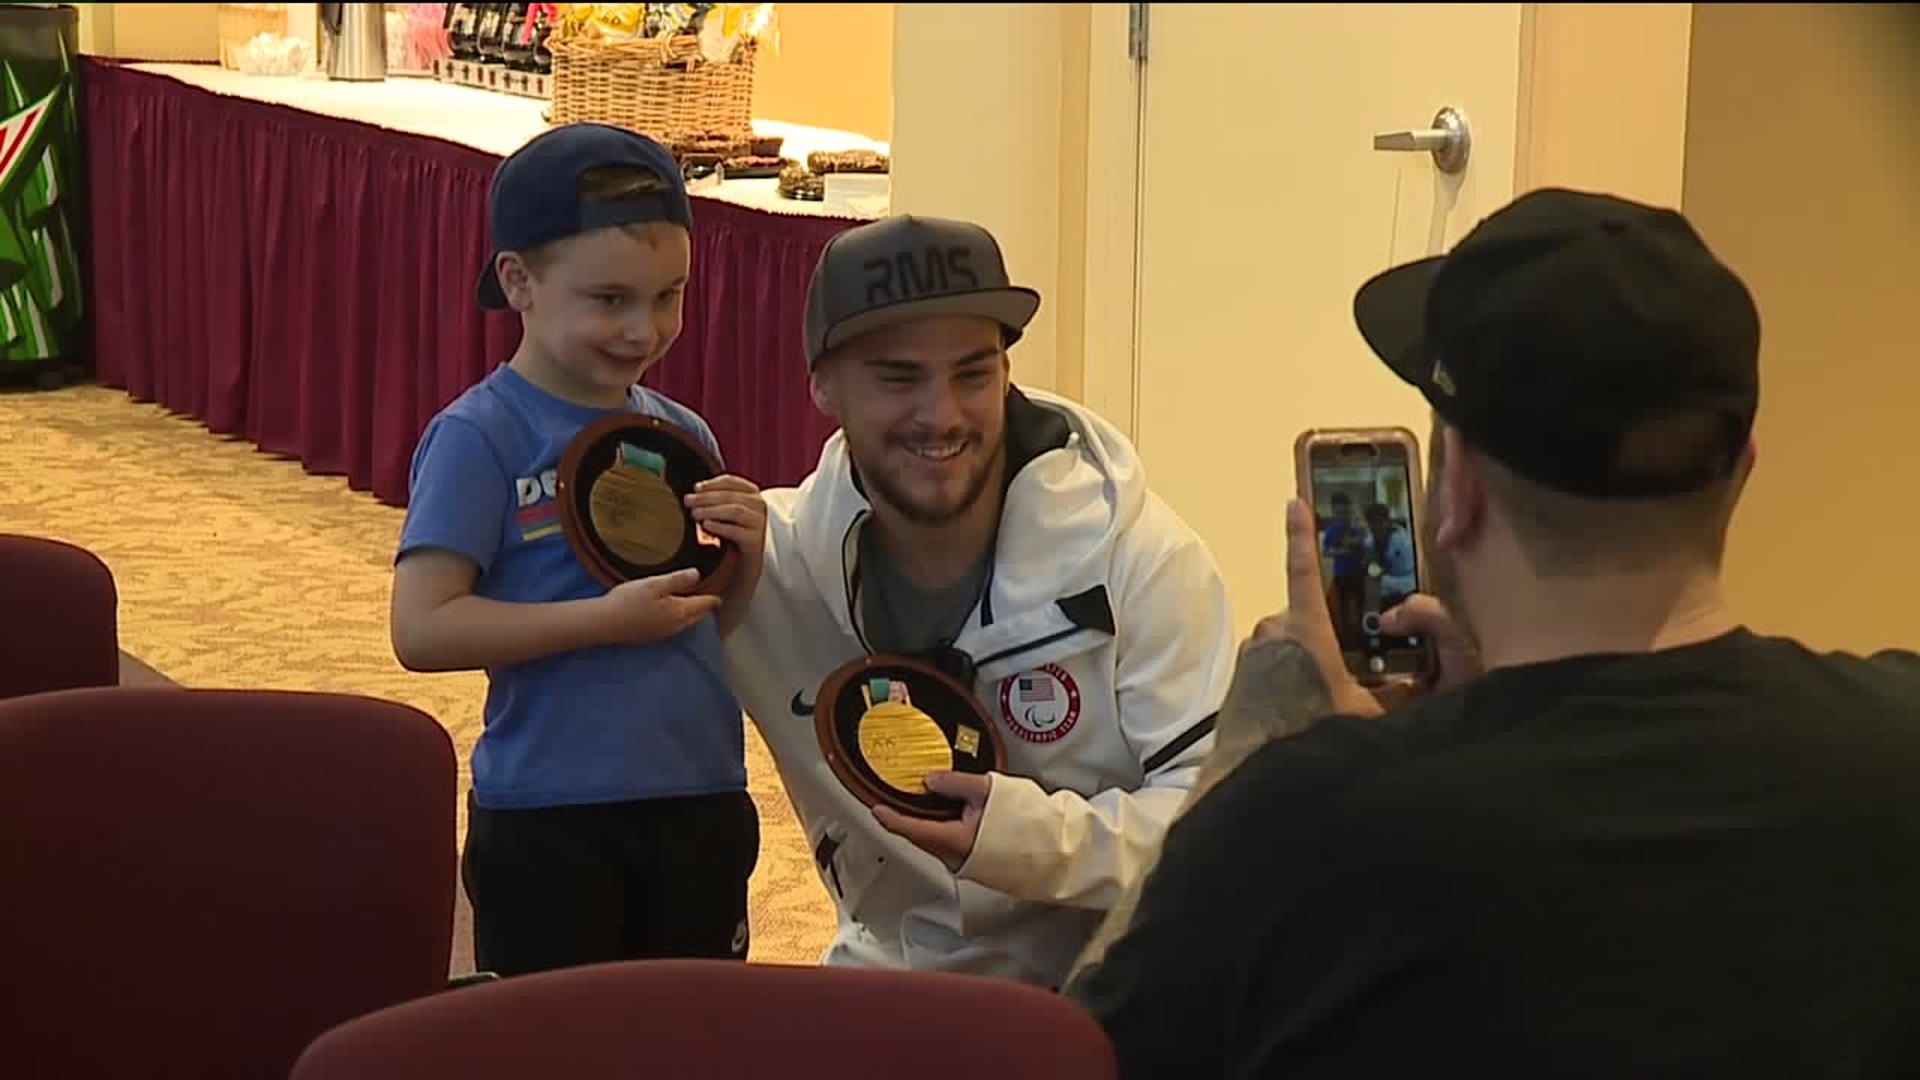 Paralympic Snowboarder Brings Inspiring Message to Allied Services in Scranton